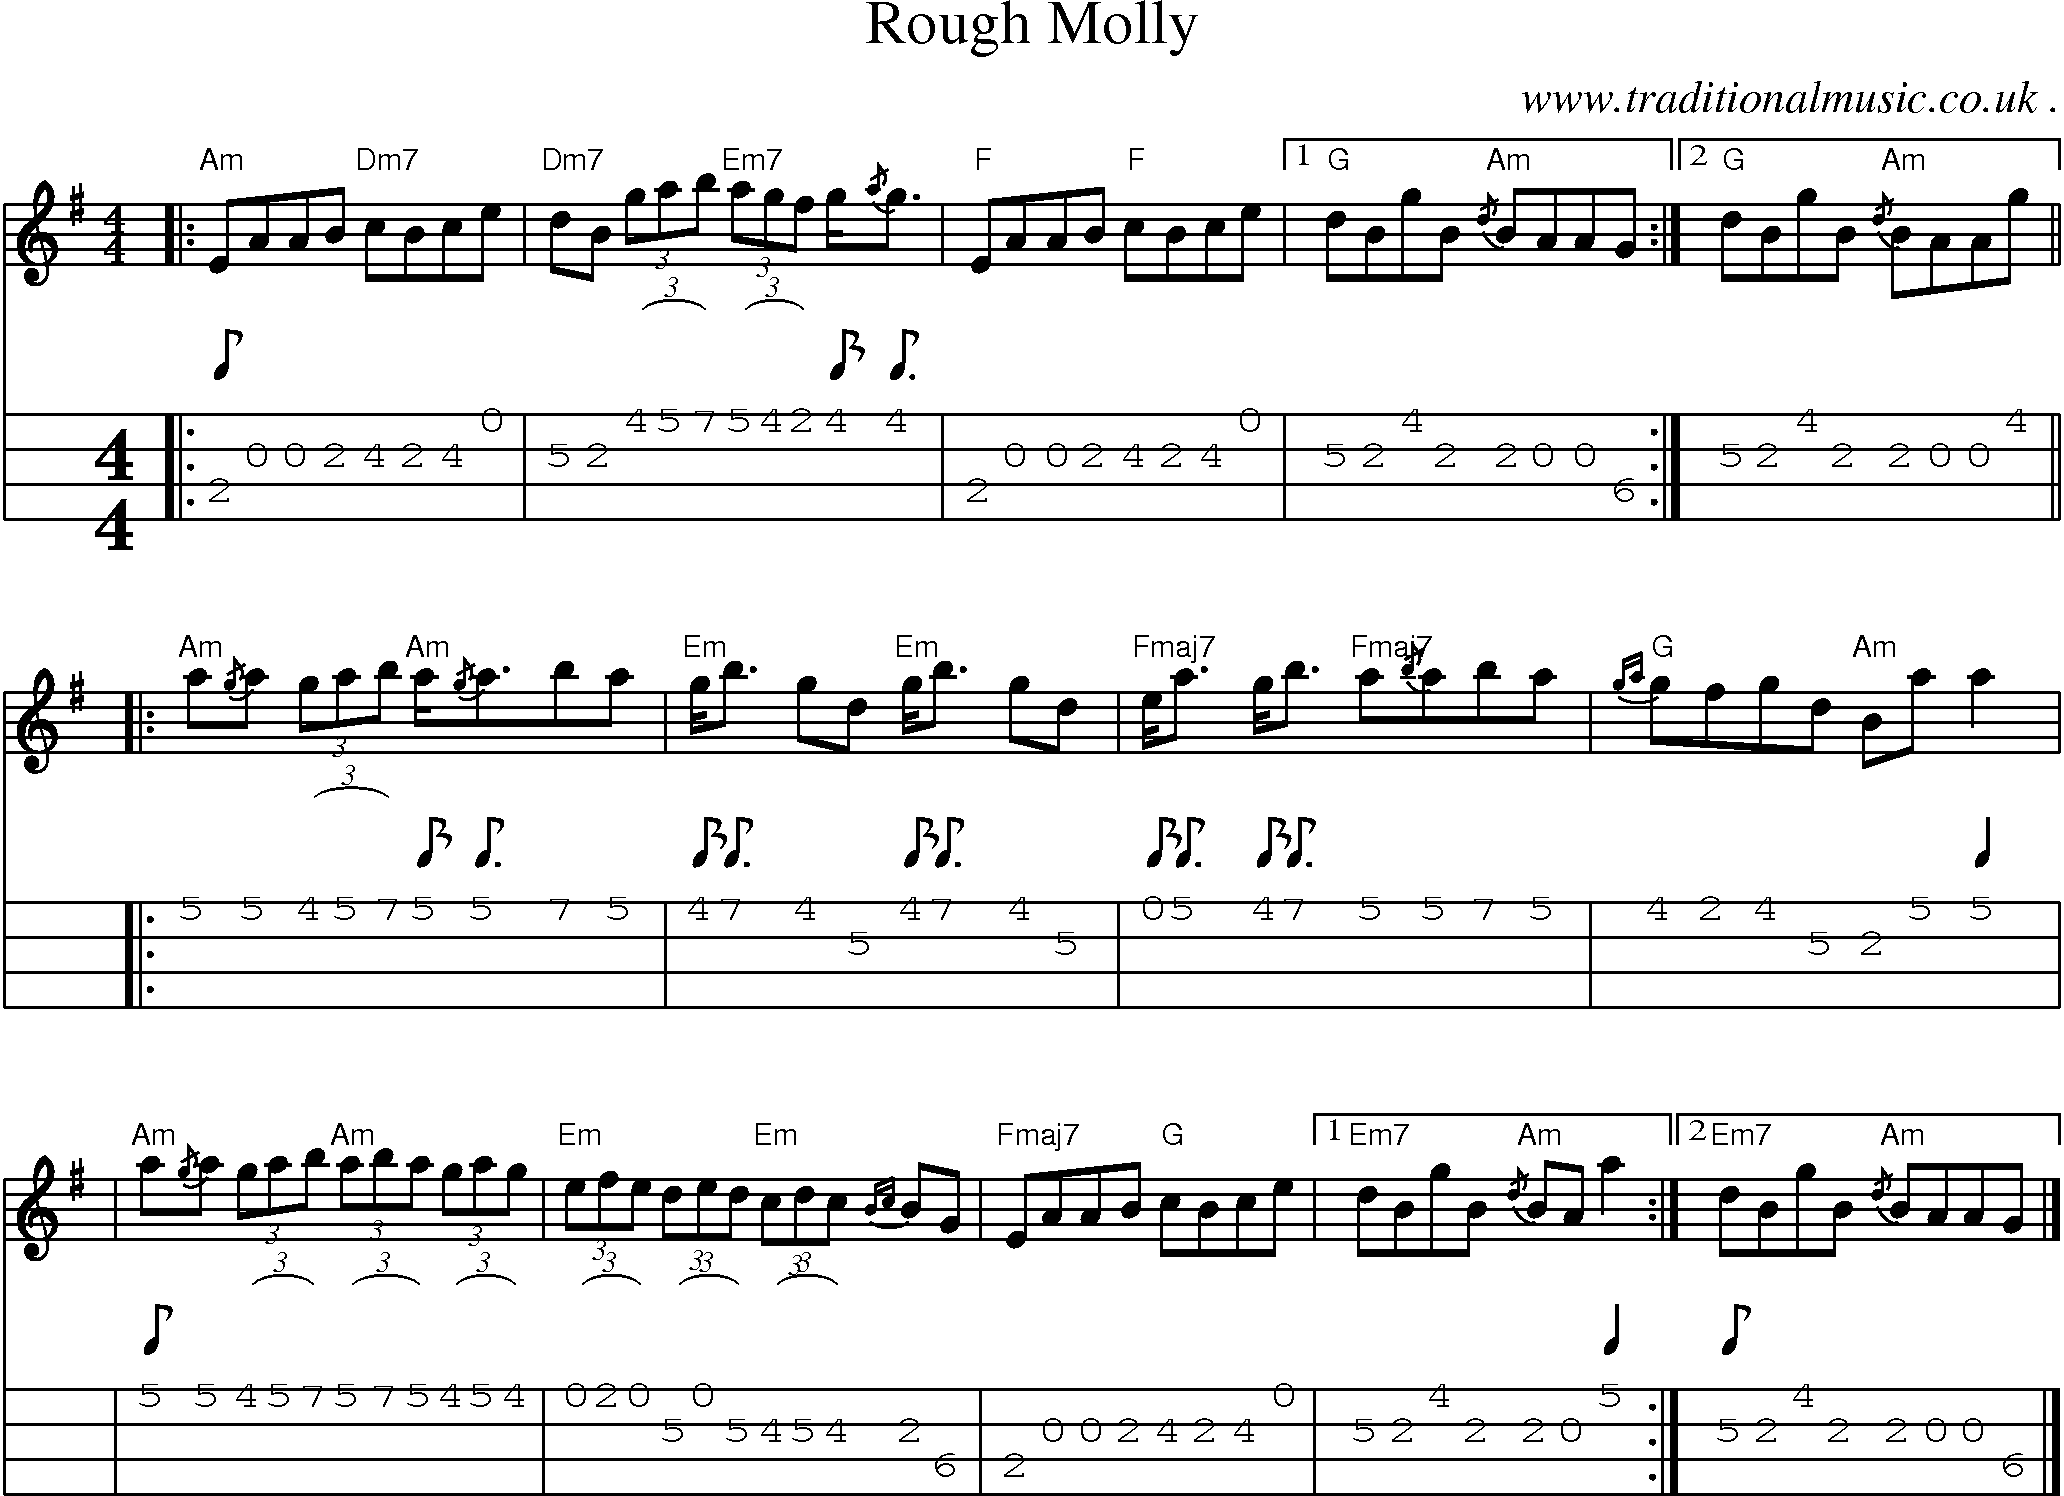 Sheet-music  score, Chords and Mandolin Tabs for Rough Molly